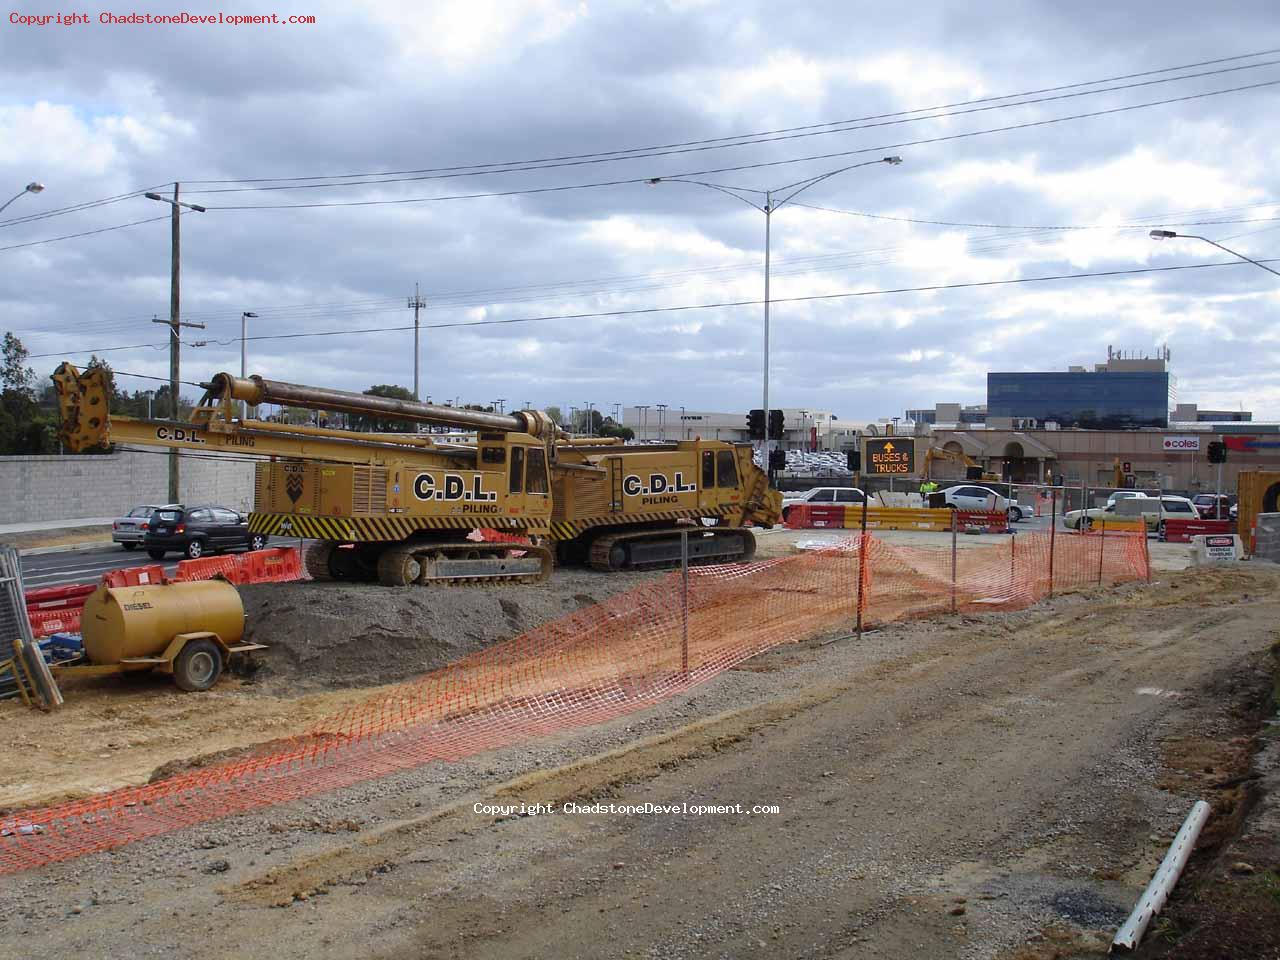 CDL Piling machines - Chadstone Development Discussions